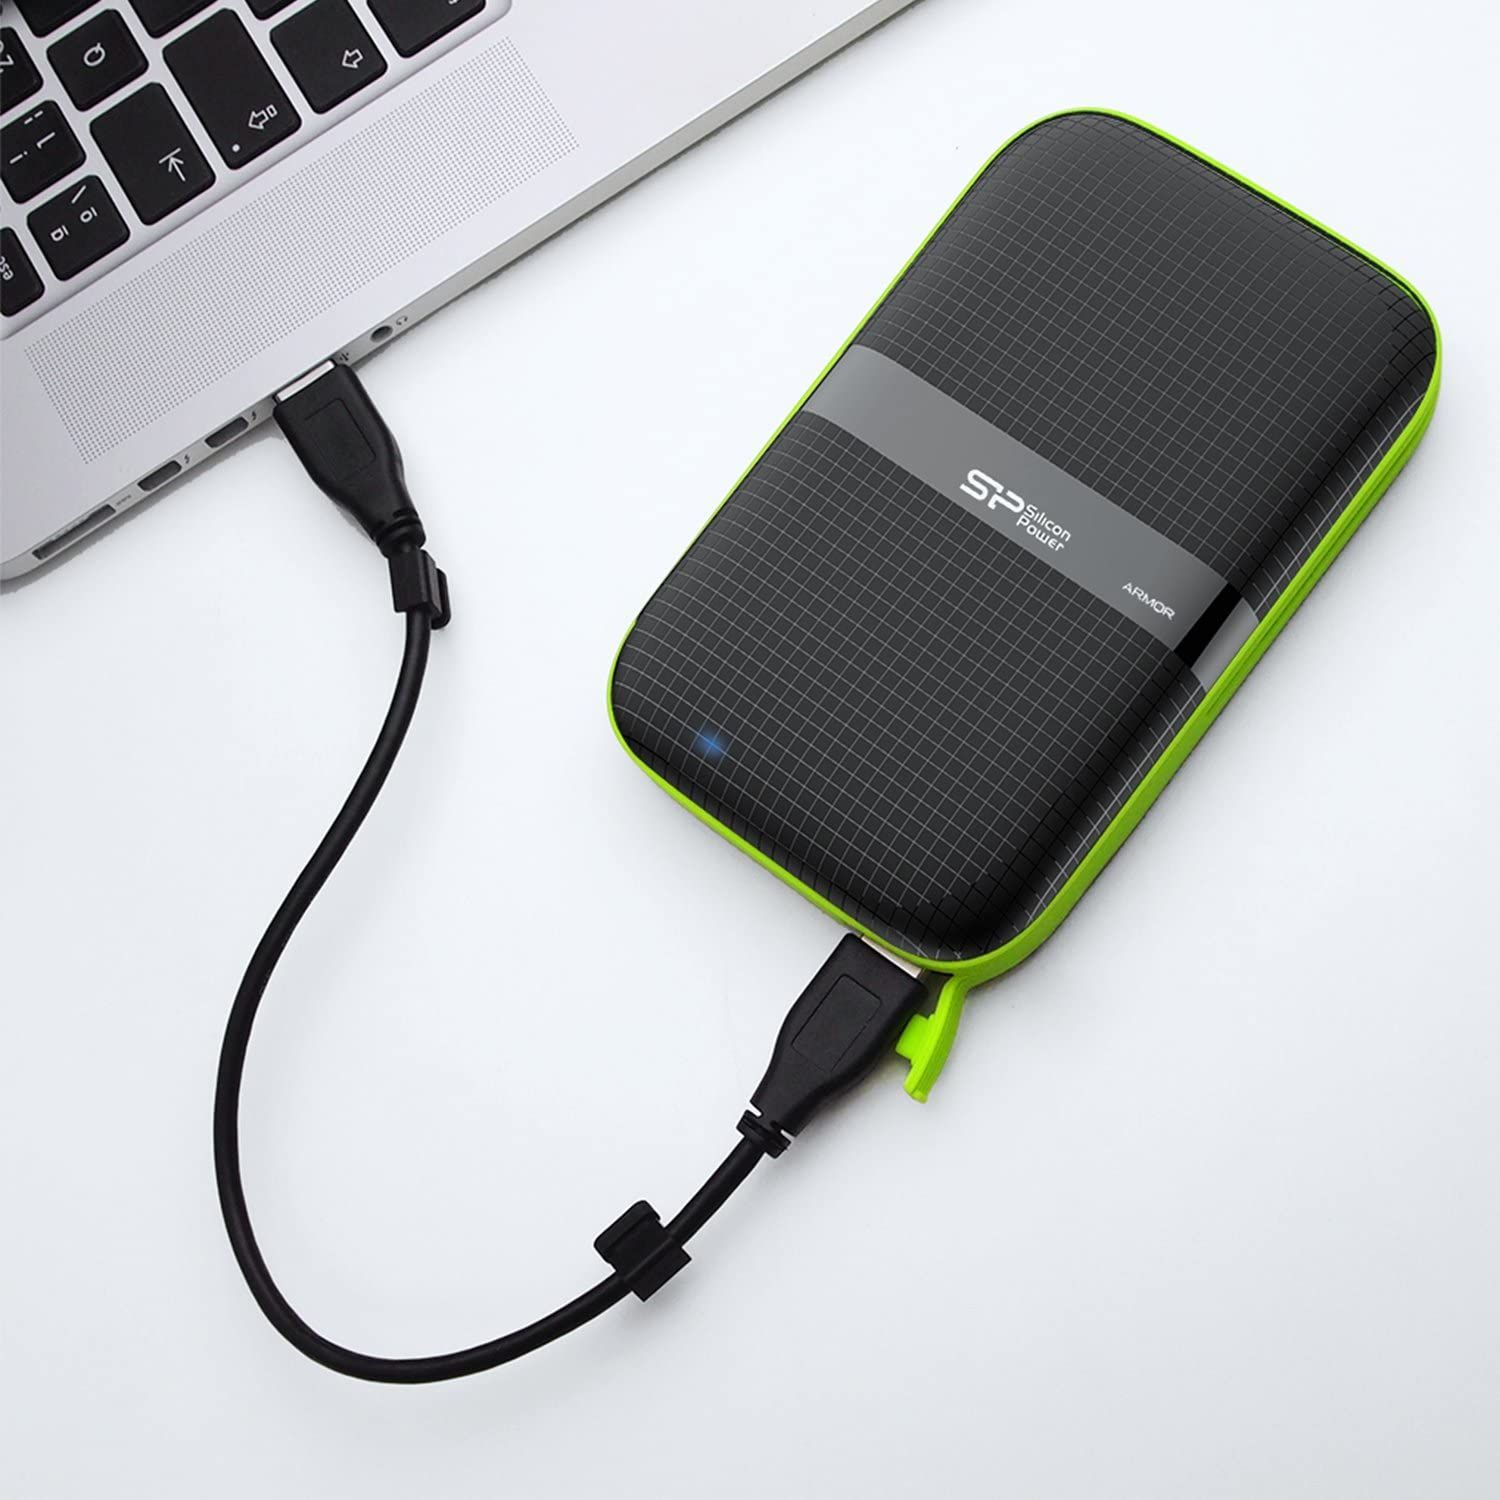 Silicon Power 2TB Rugged Portable External Hard Drive c